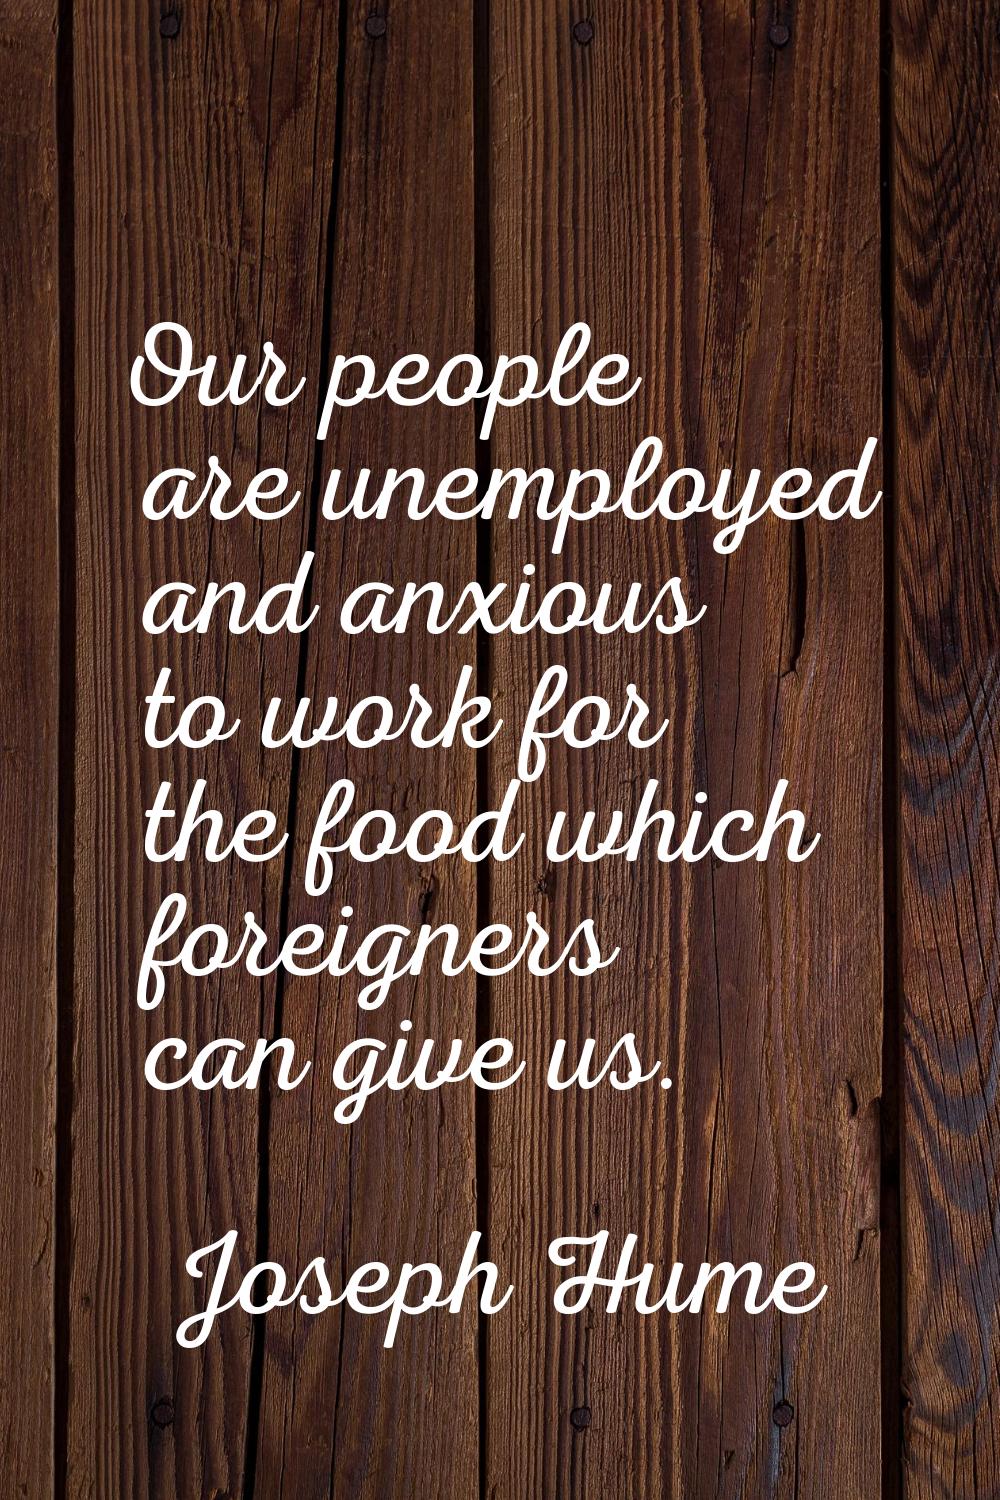 Our people are unemployed and anxious to work for the food which foreigners can give us.